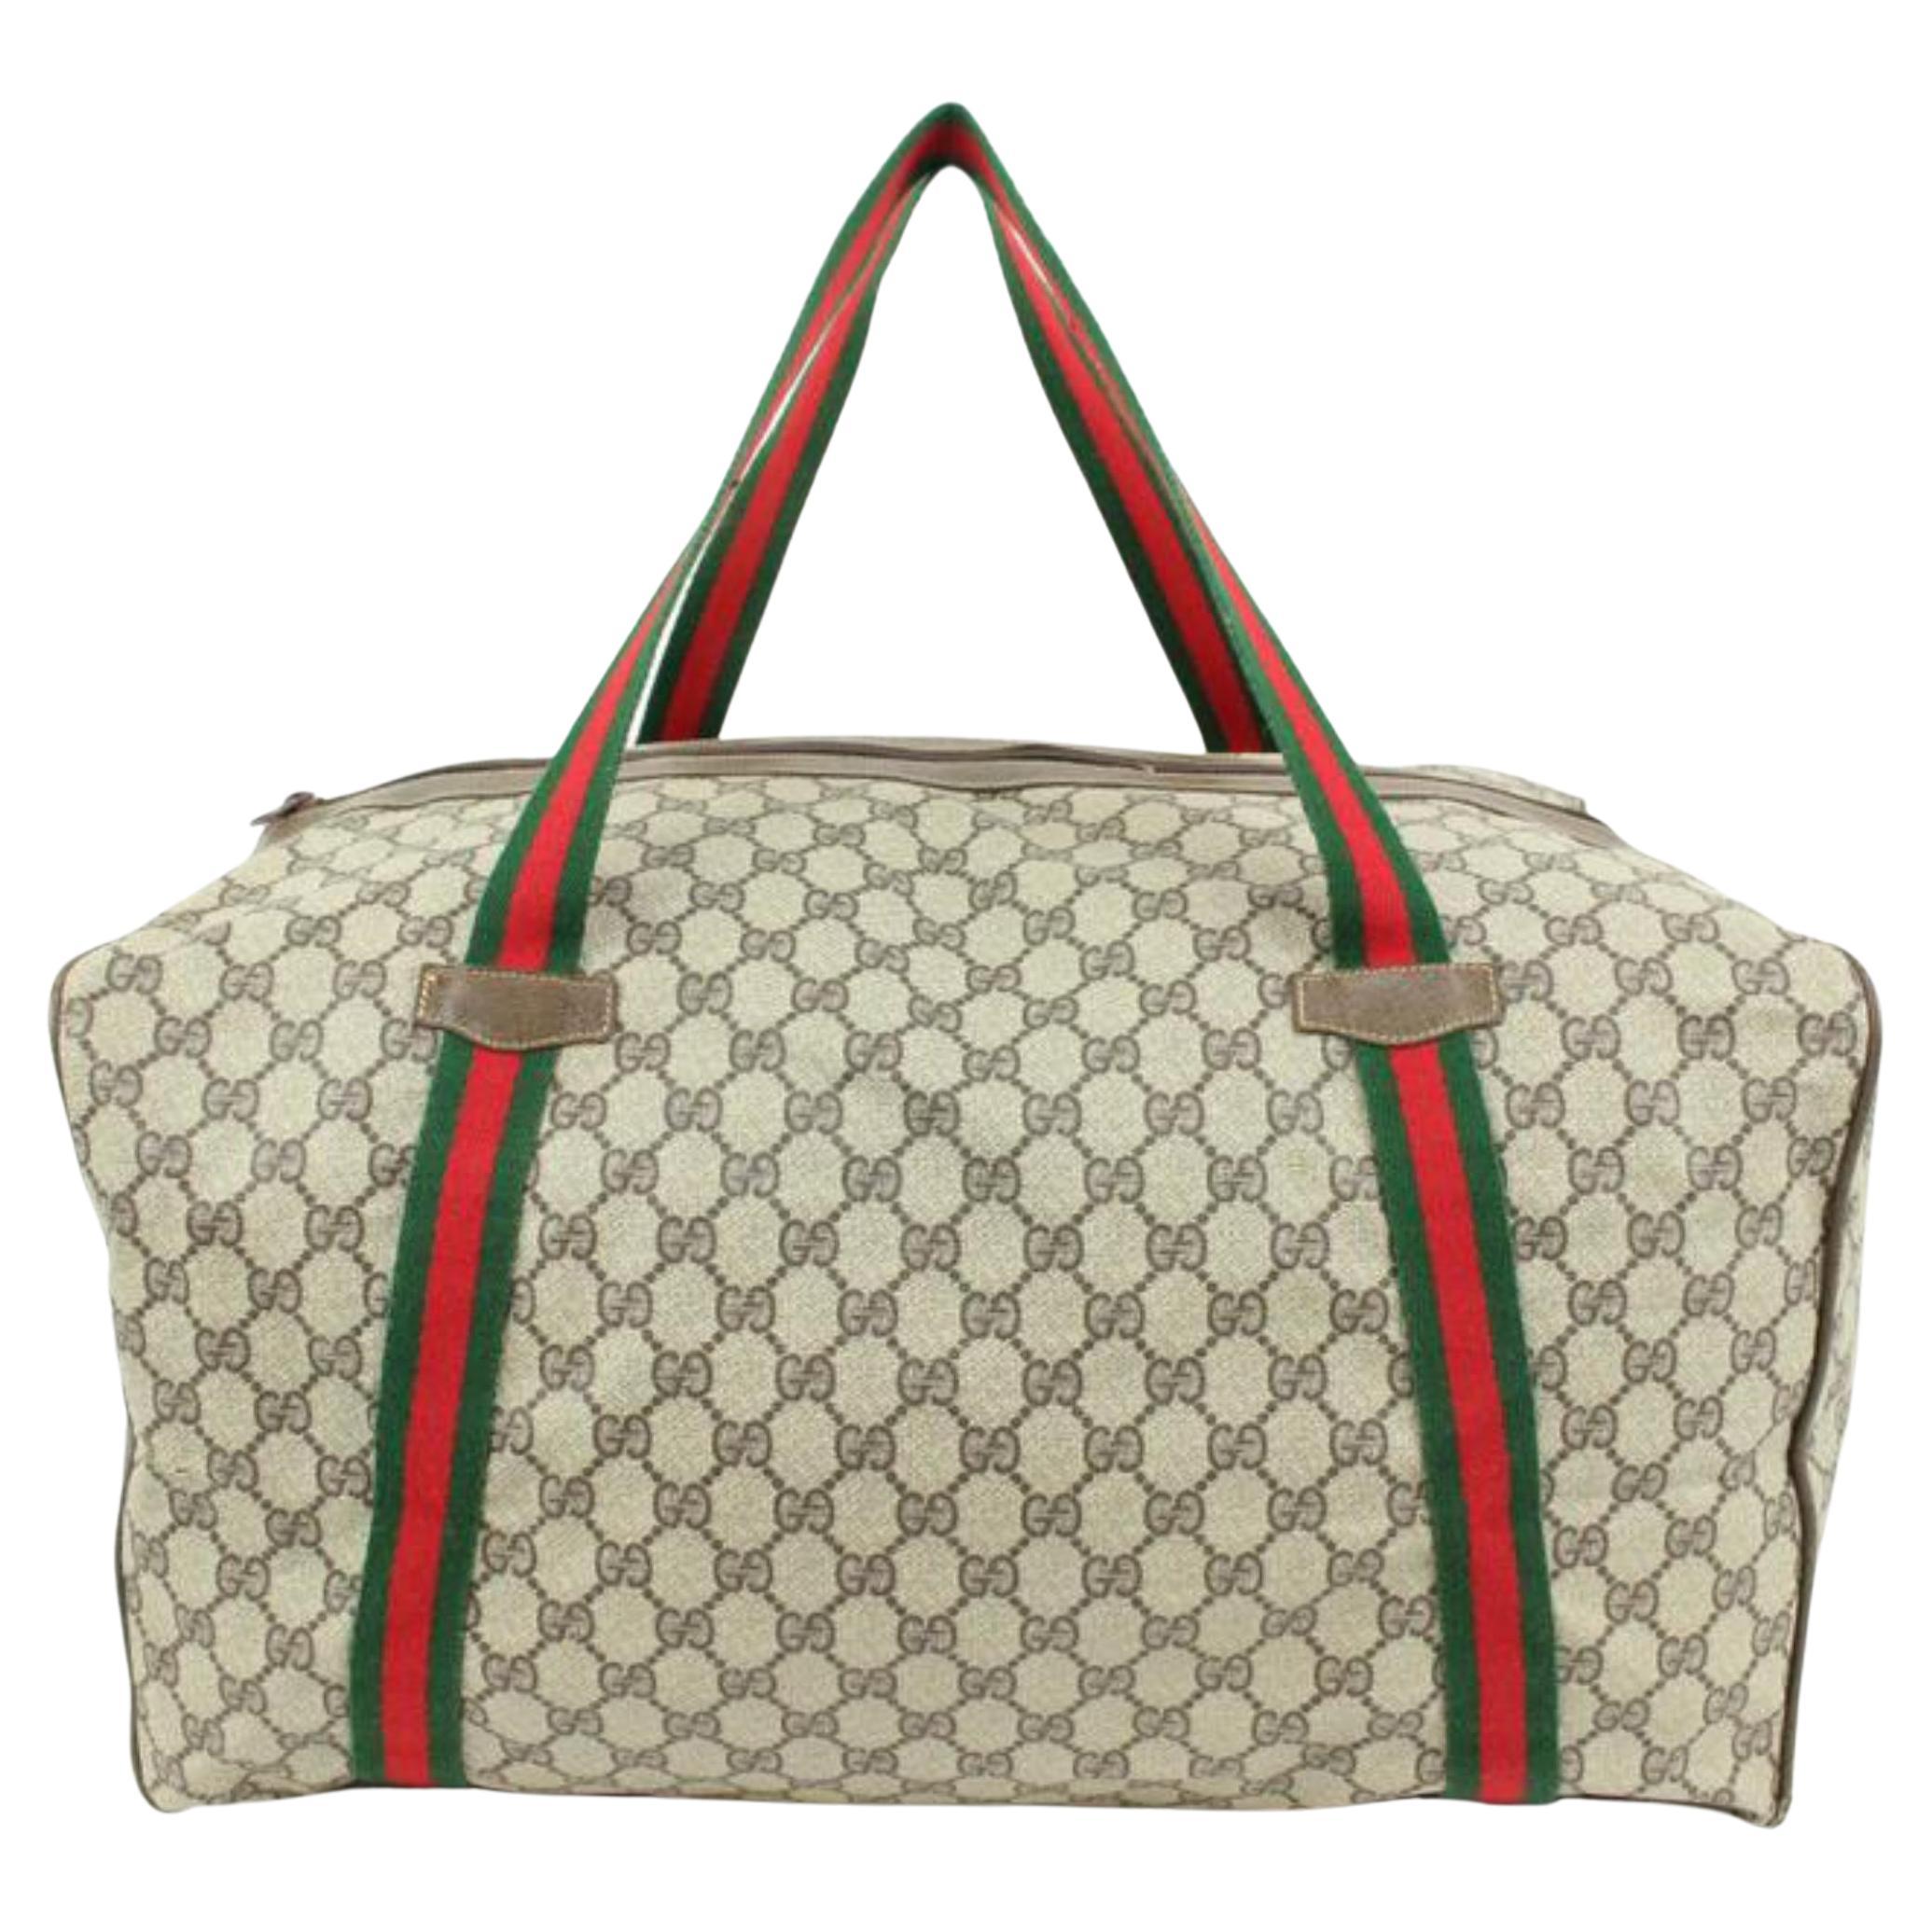 Gucci Supreme Monogram Patches Carry On Duffle Bag Travel Leather Black  Week NEW